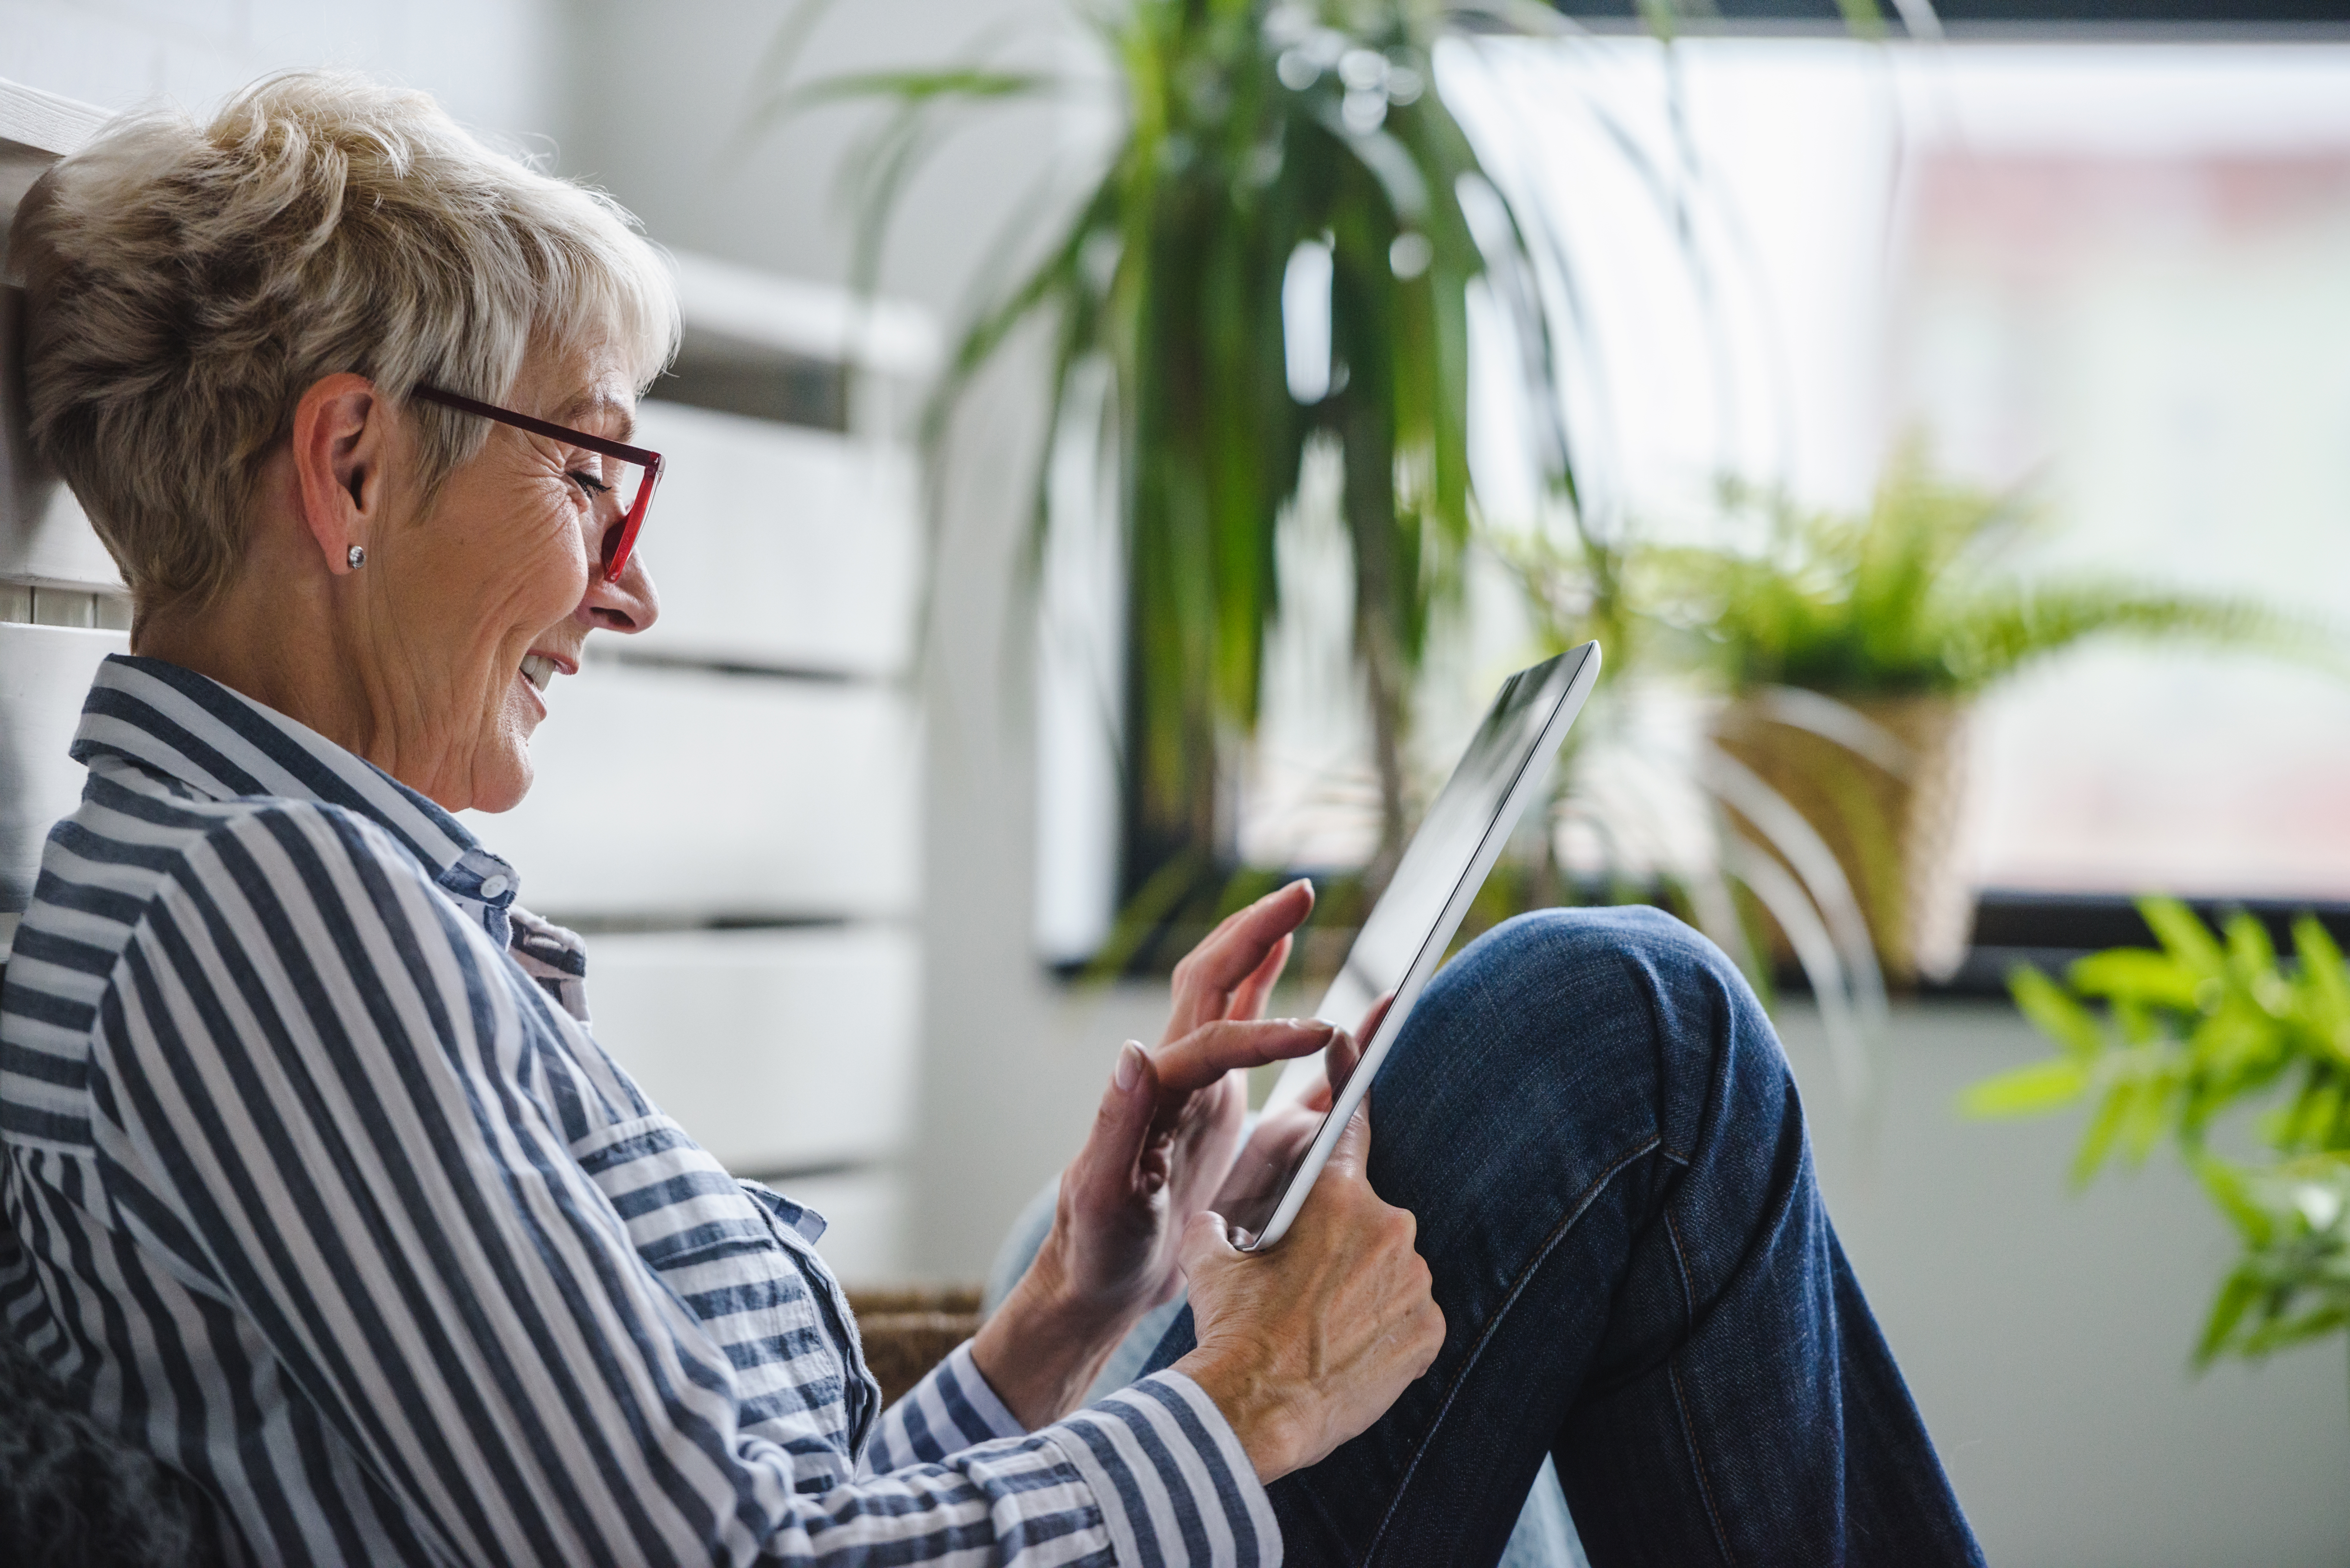 Older woman sitting in a bright room next to a houseplant, smiling and interacting with a tablet in her lap